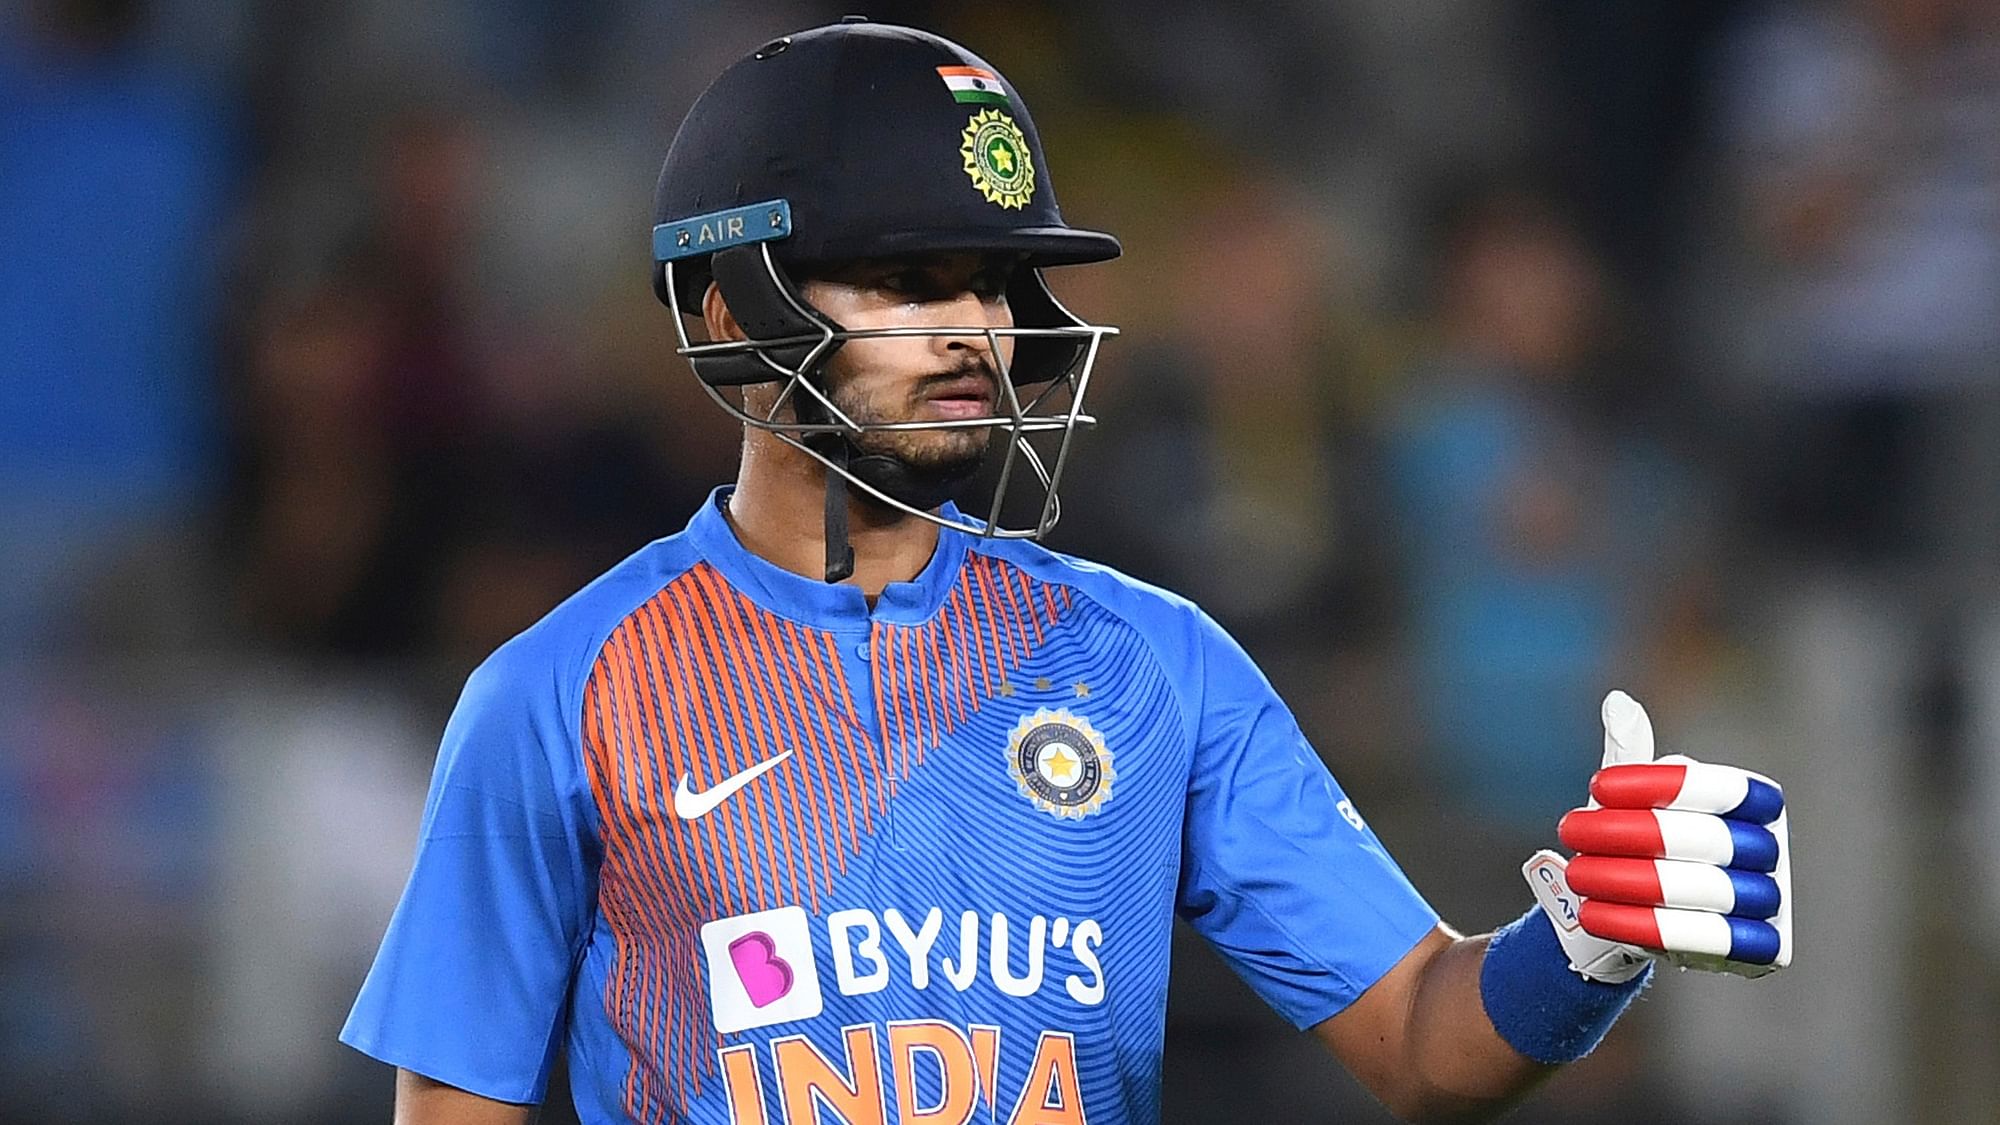 Shreyas Iyer now owns the No 4 slot in white ball cricket but the success has come owing to his flexible batting positions between numbers 3 to 5 for the India A team, where he learnt the art of tackling various match situations.